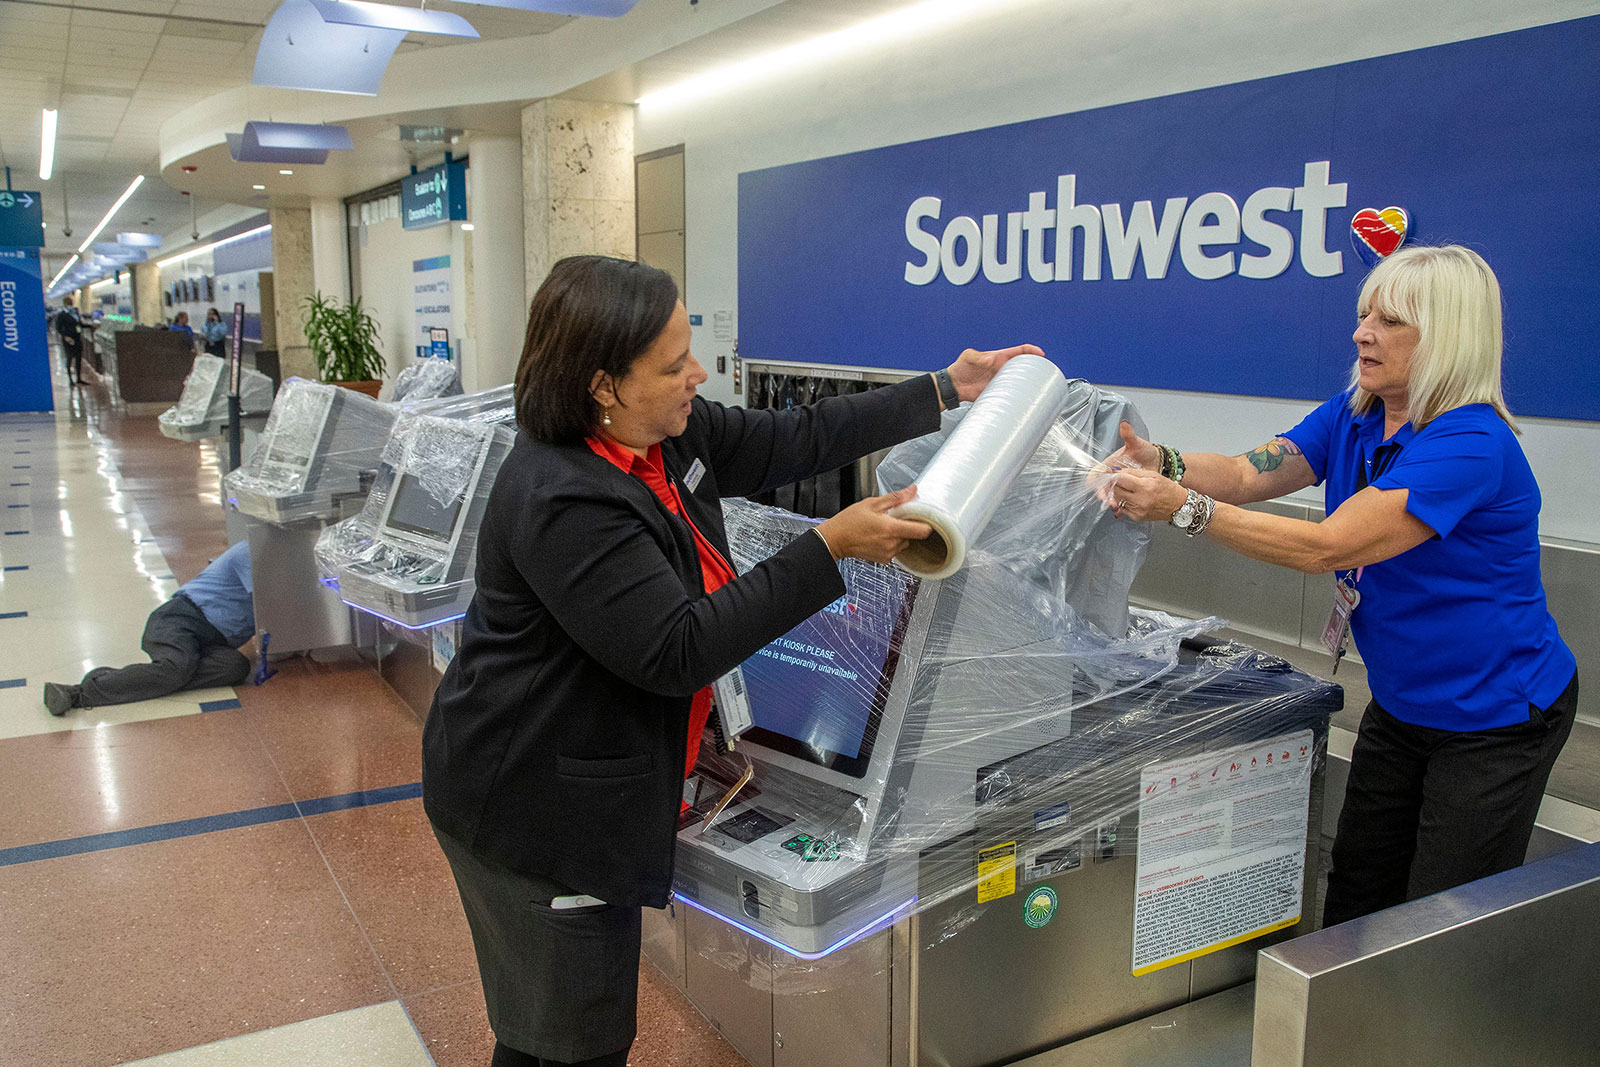 Fabiola Lindor, left, and Lisa MacNeal of Southwest Airlines cover computer systems with plastic wrap to protect them from potential leaks in West Palm Beach, Florida, on November 9.